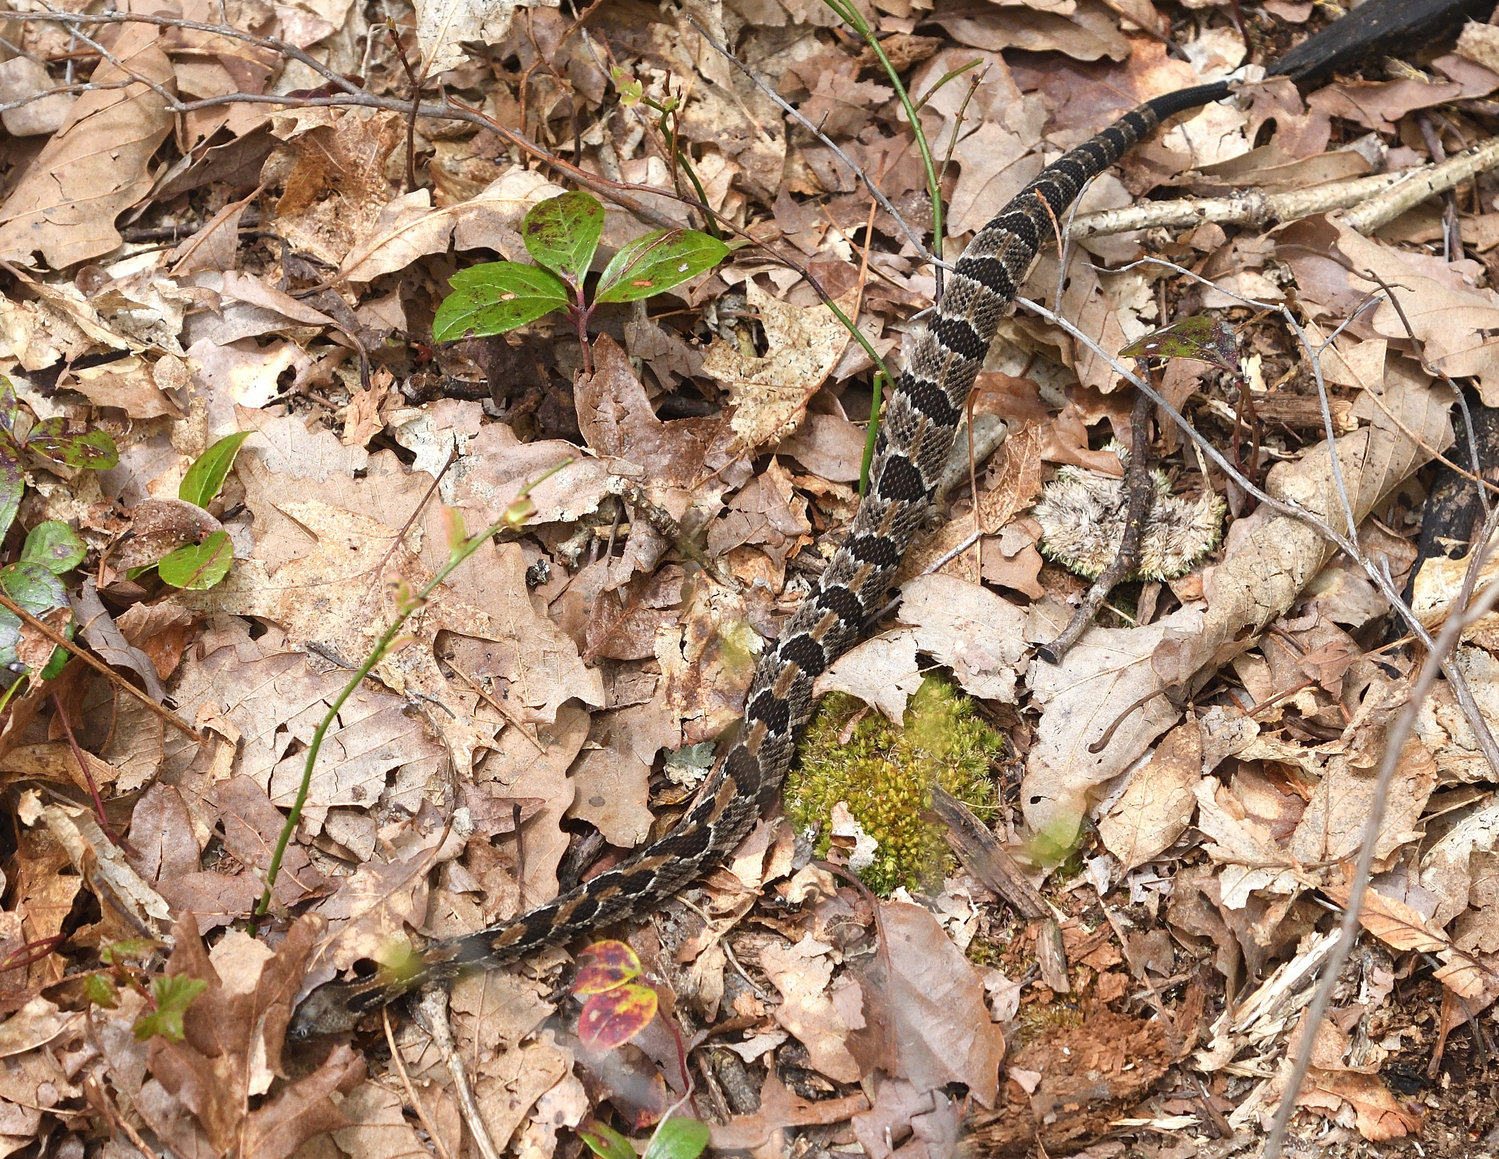 This young-of year timber rattlesnake, also seen during late May, is enjoying its first spring since entering its den this past September. Young-of-year rattlesnakes (newborns that are not yet one year old) now have some color as compared to when they were neonates last late-summer and had their pattern on a gray-cast background. This individual is a black-phase and, like a lot of snake species, they have somewhat more distinctive markings when they are young.